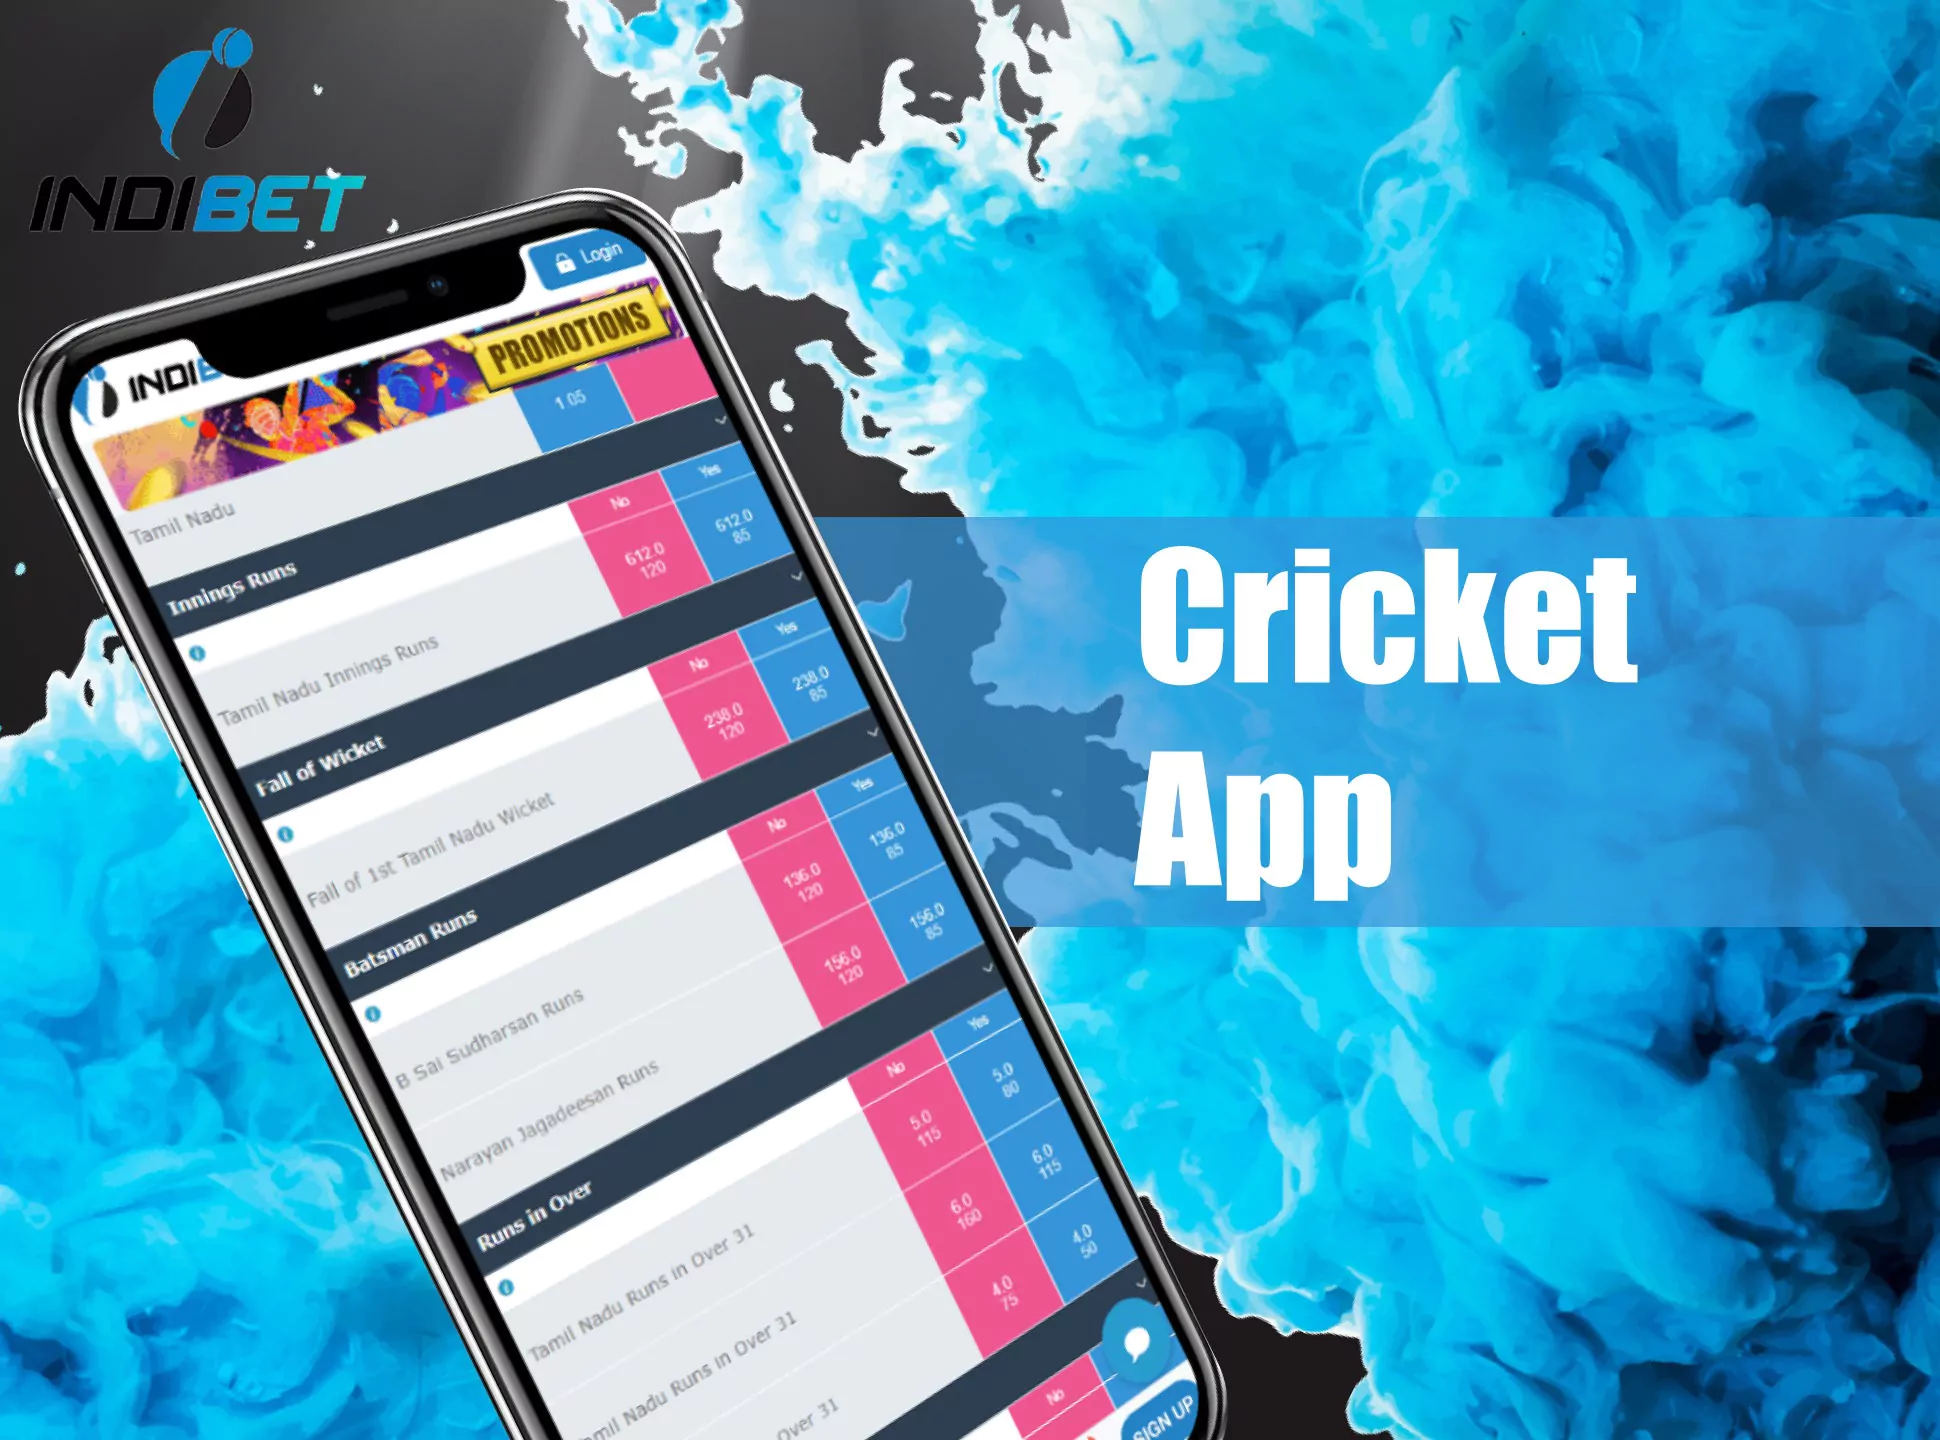 Make cricket bets using the app.